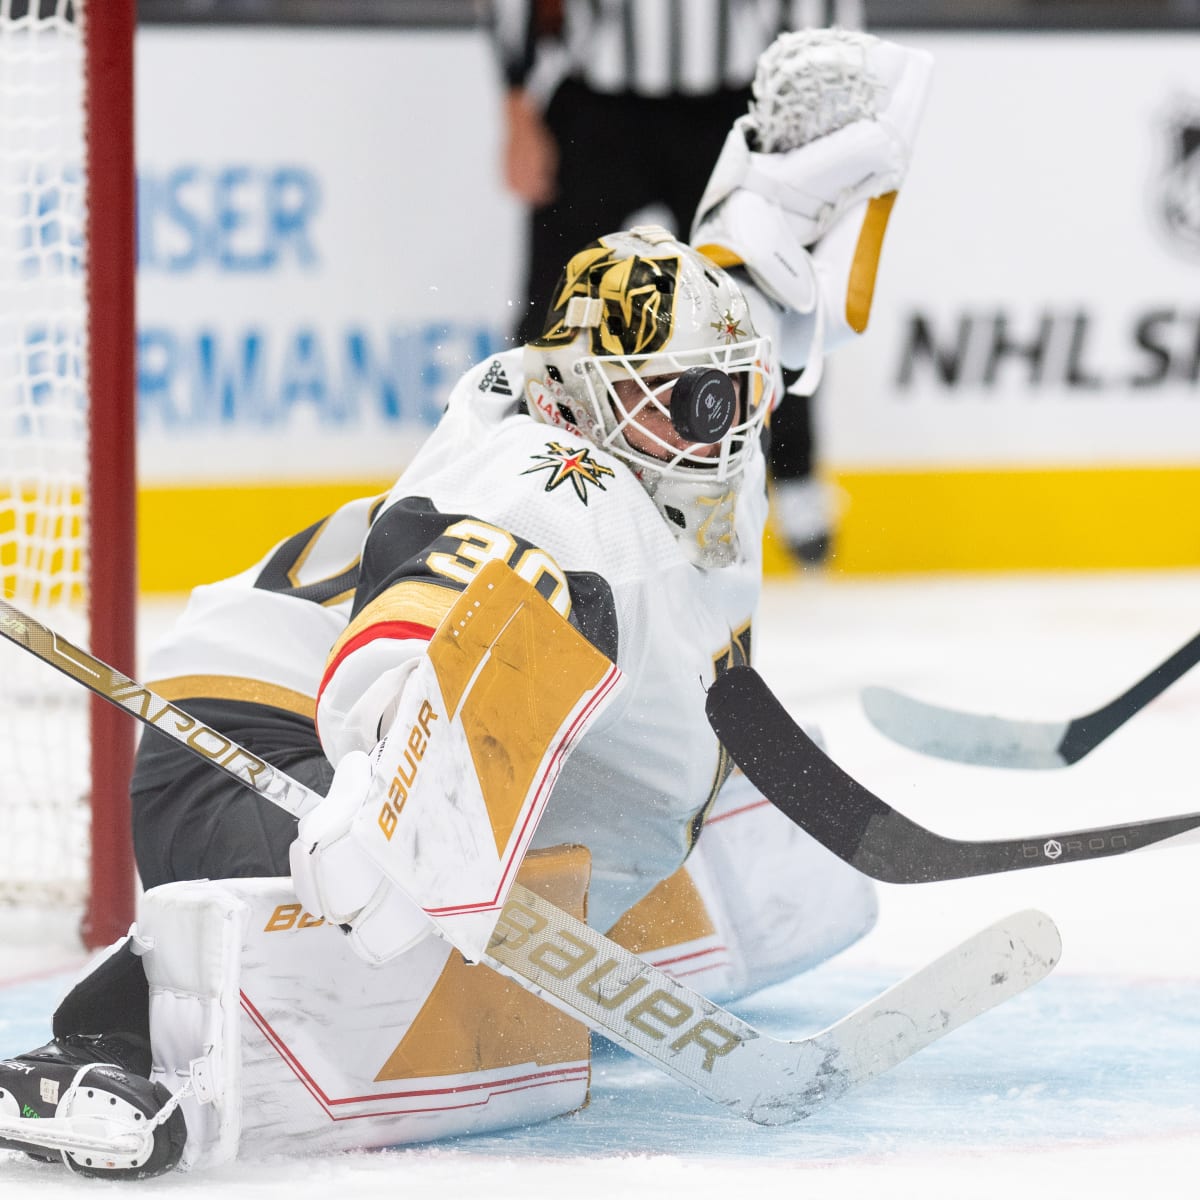 Golden Knights G Jiri Patera beats Blues in NHL debut - The Rink Live   Comprehensive coverage of youth, junior, high school and college hockey